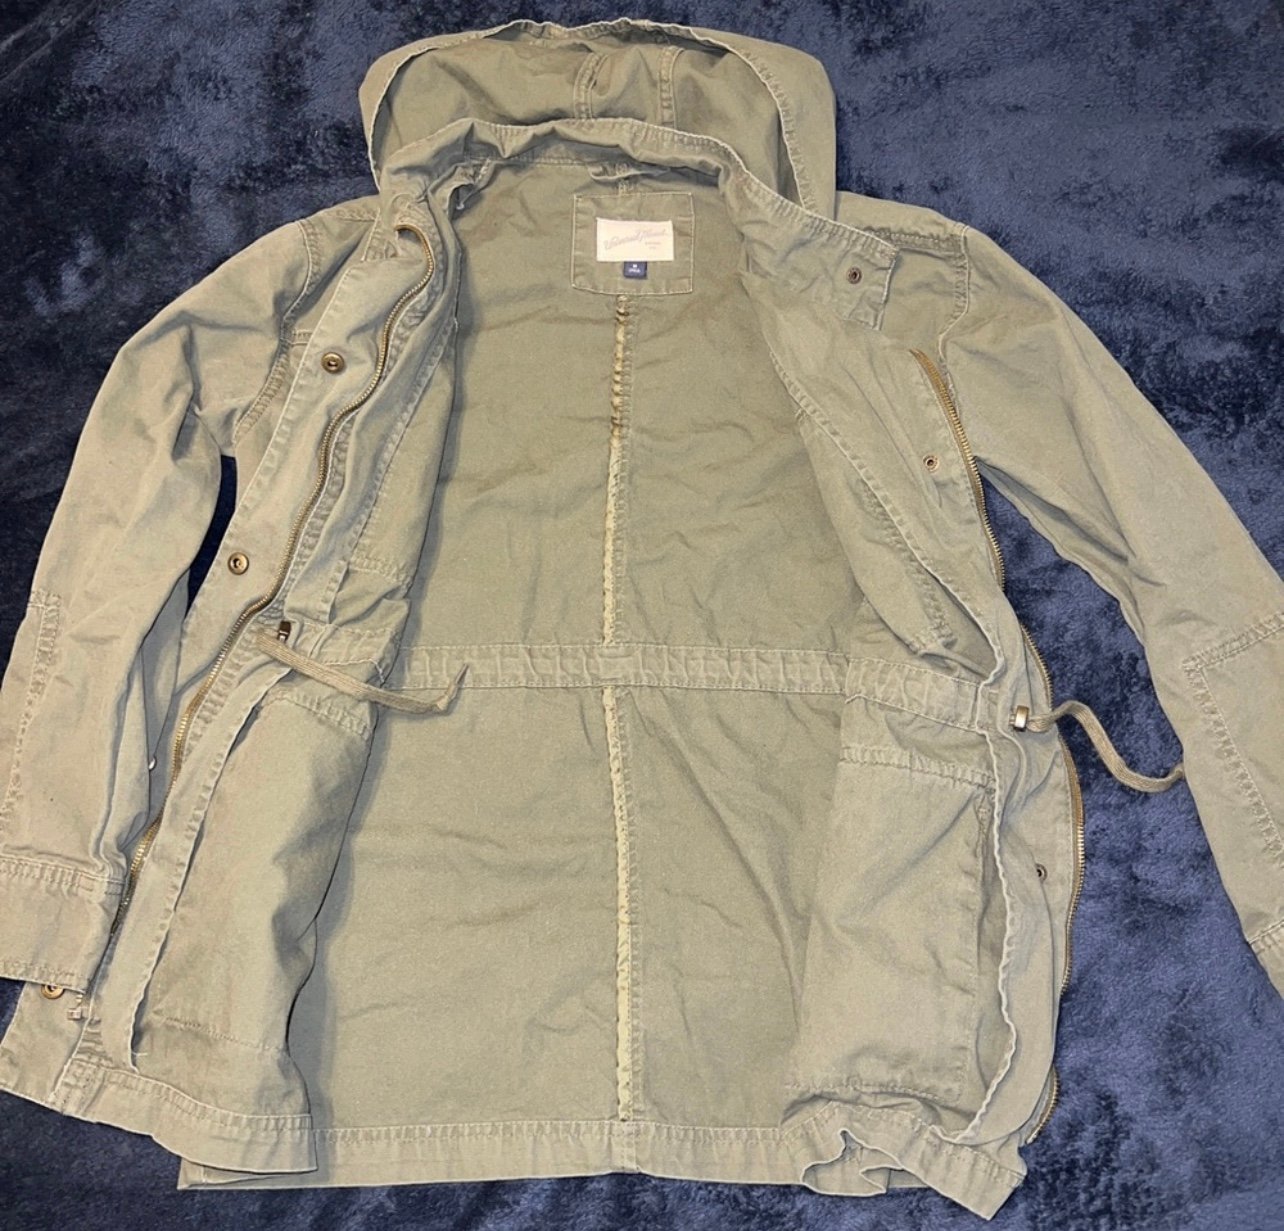 save up to 70% Universal Thread olive utility jacket M KyLtQiYzQ Everyday Low Prices